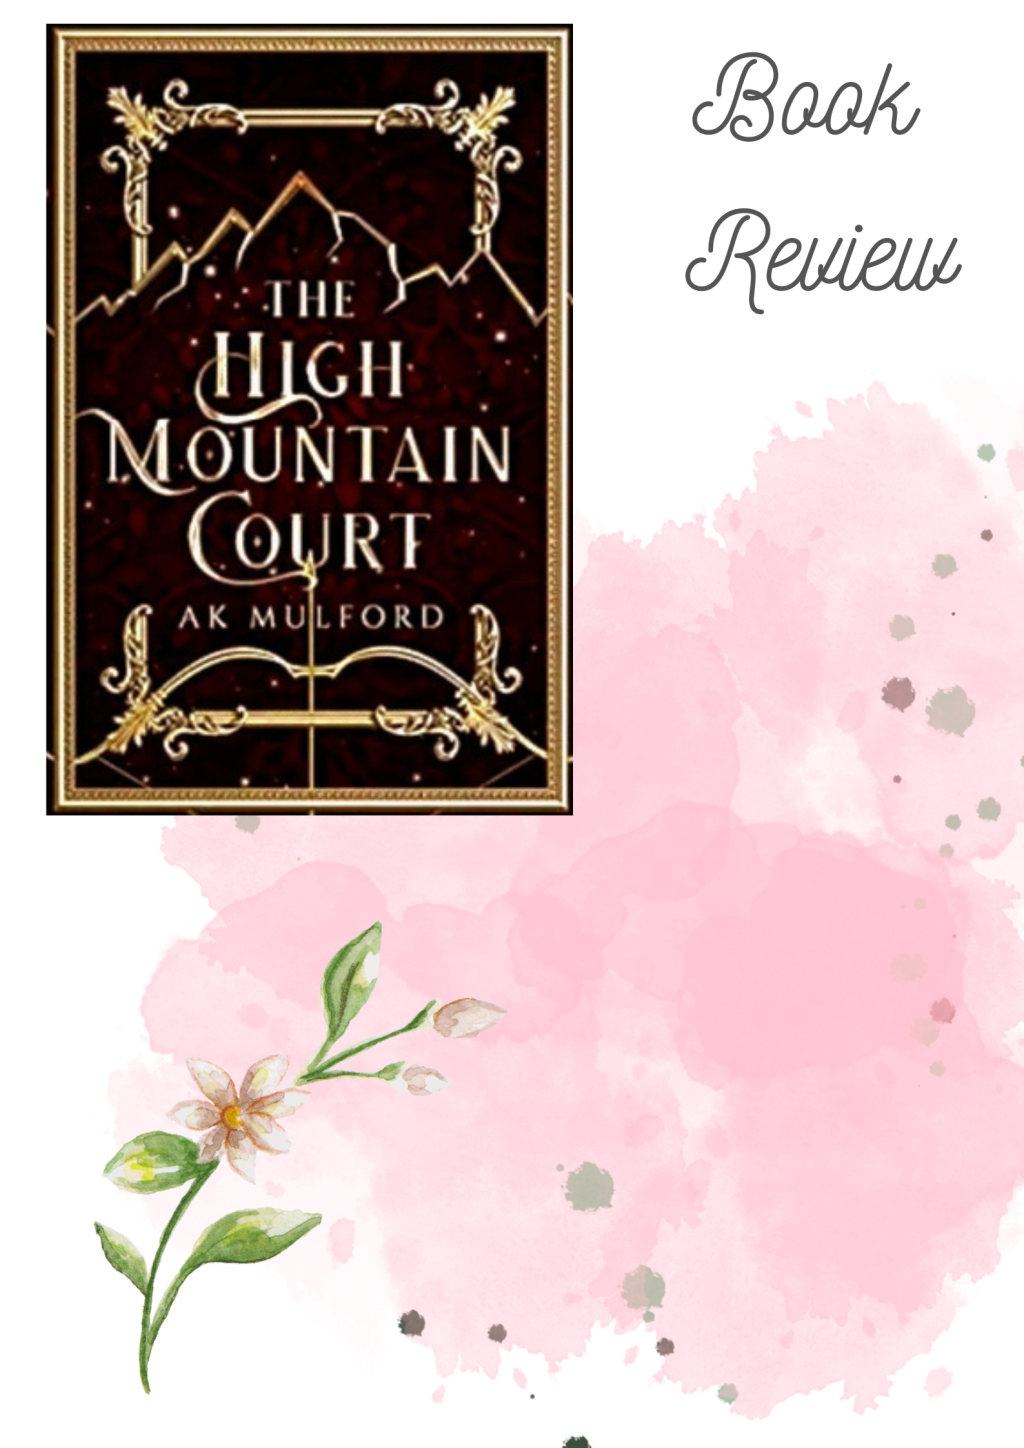 ARC Review: THE HIGH MOUNTAIN COURT by A. K. MULFORD